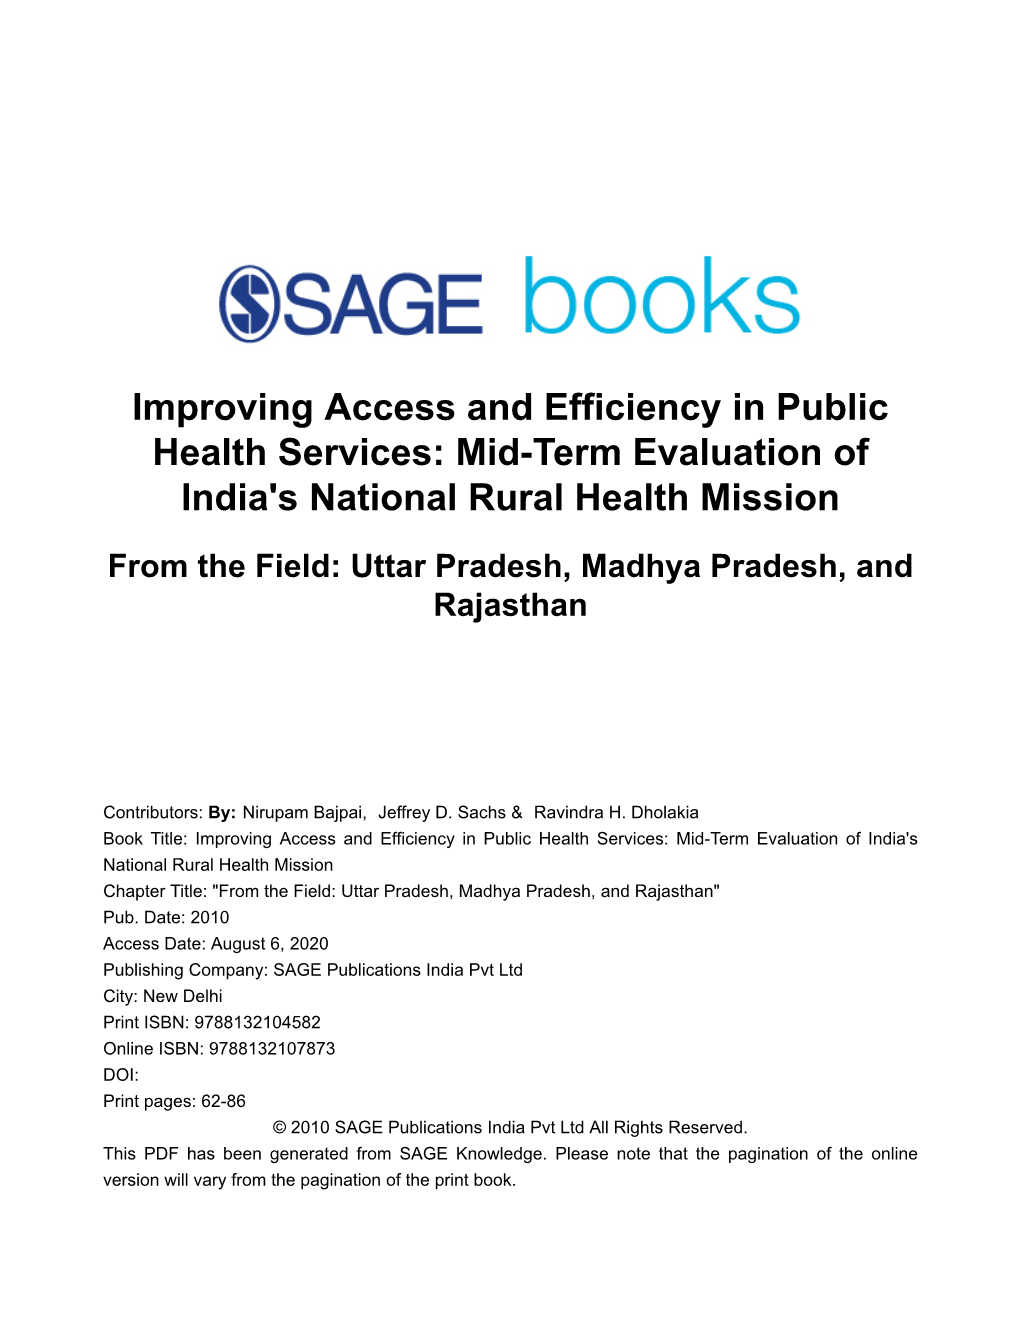 Improving Access and Efficiency in Public Health Services: Mid-Term Evaluation of India's National Rural Health Mission